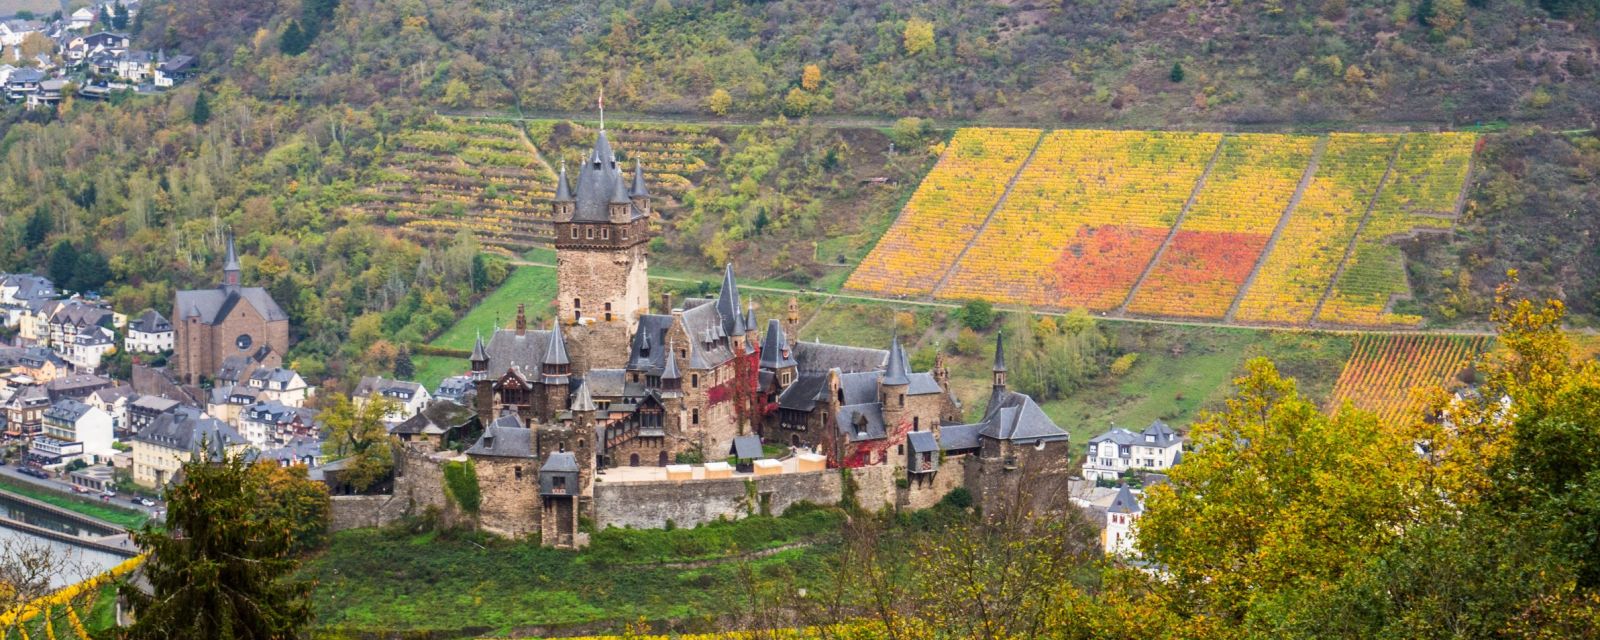 Cochem Castle - Reichsburg Castle at Moselle River in Germany